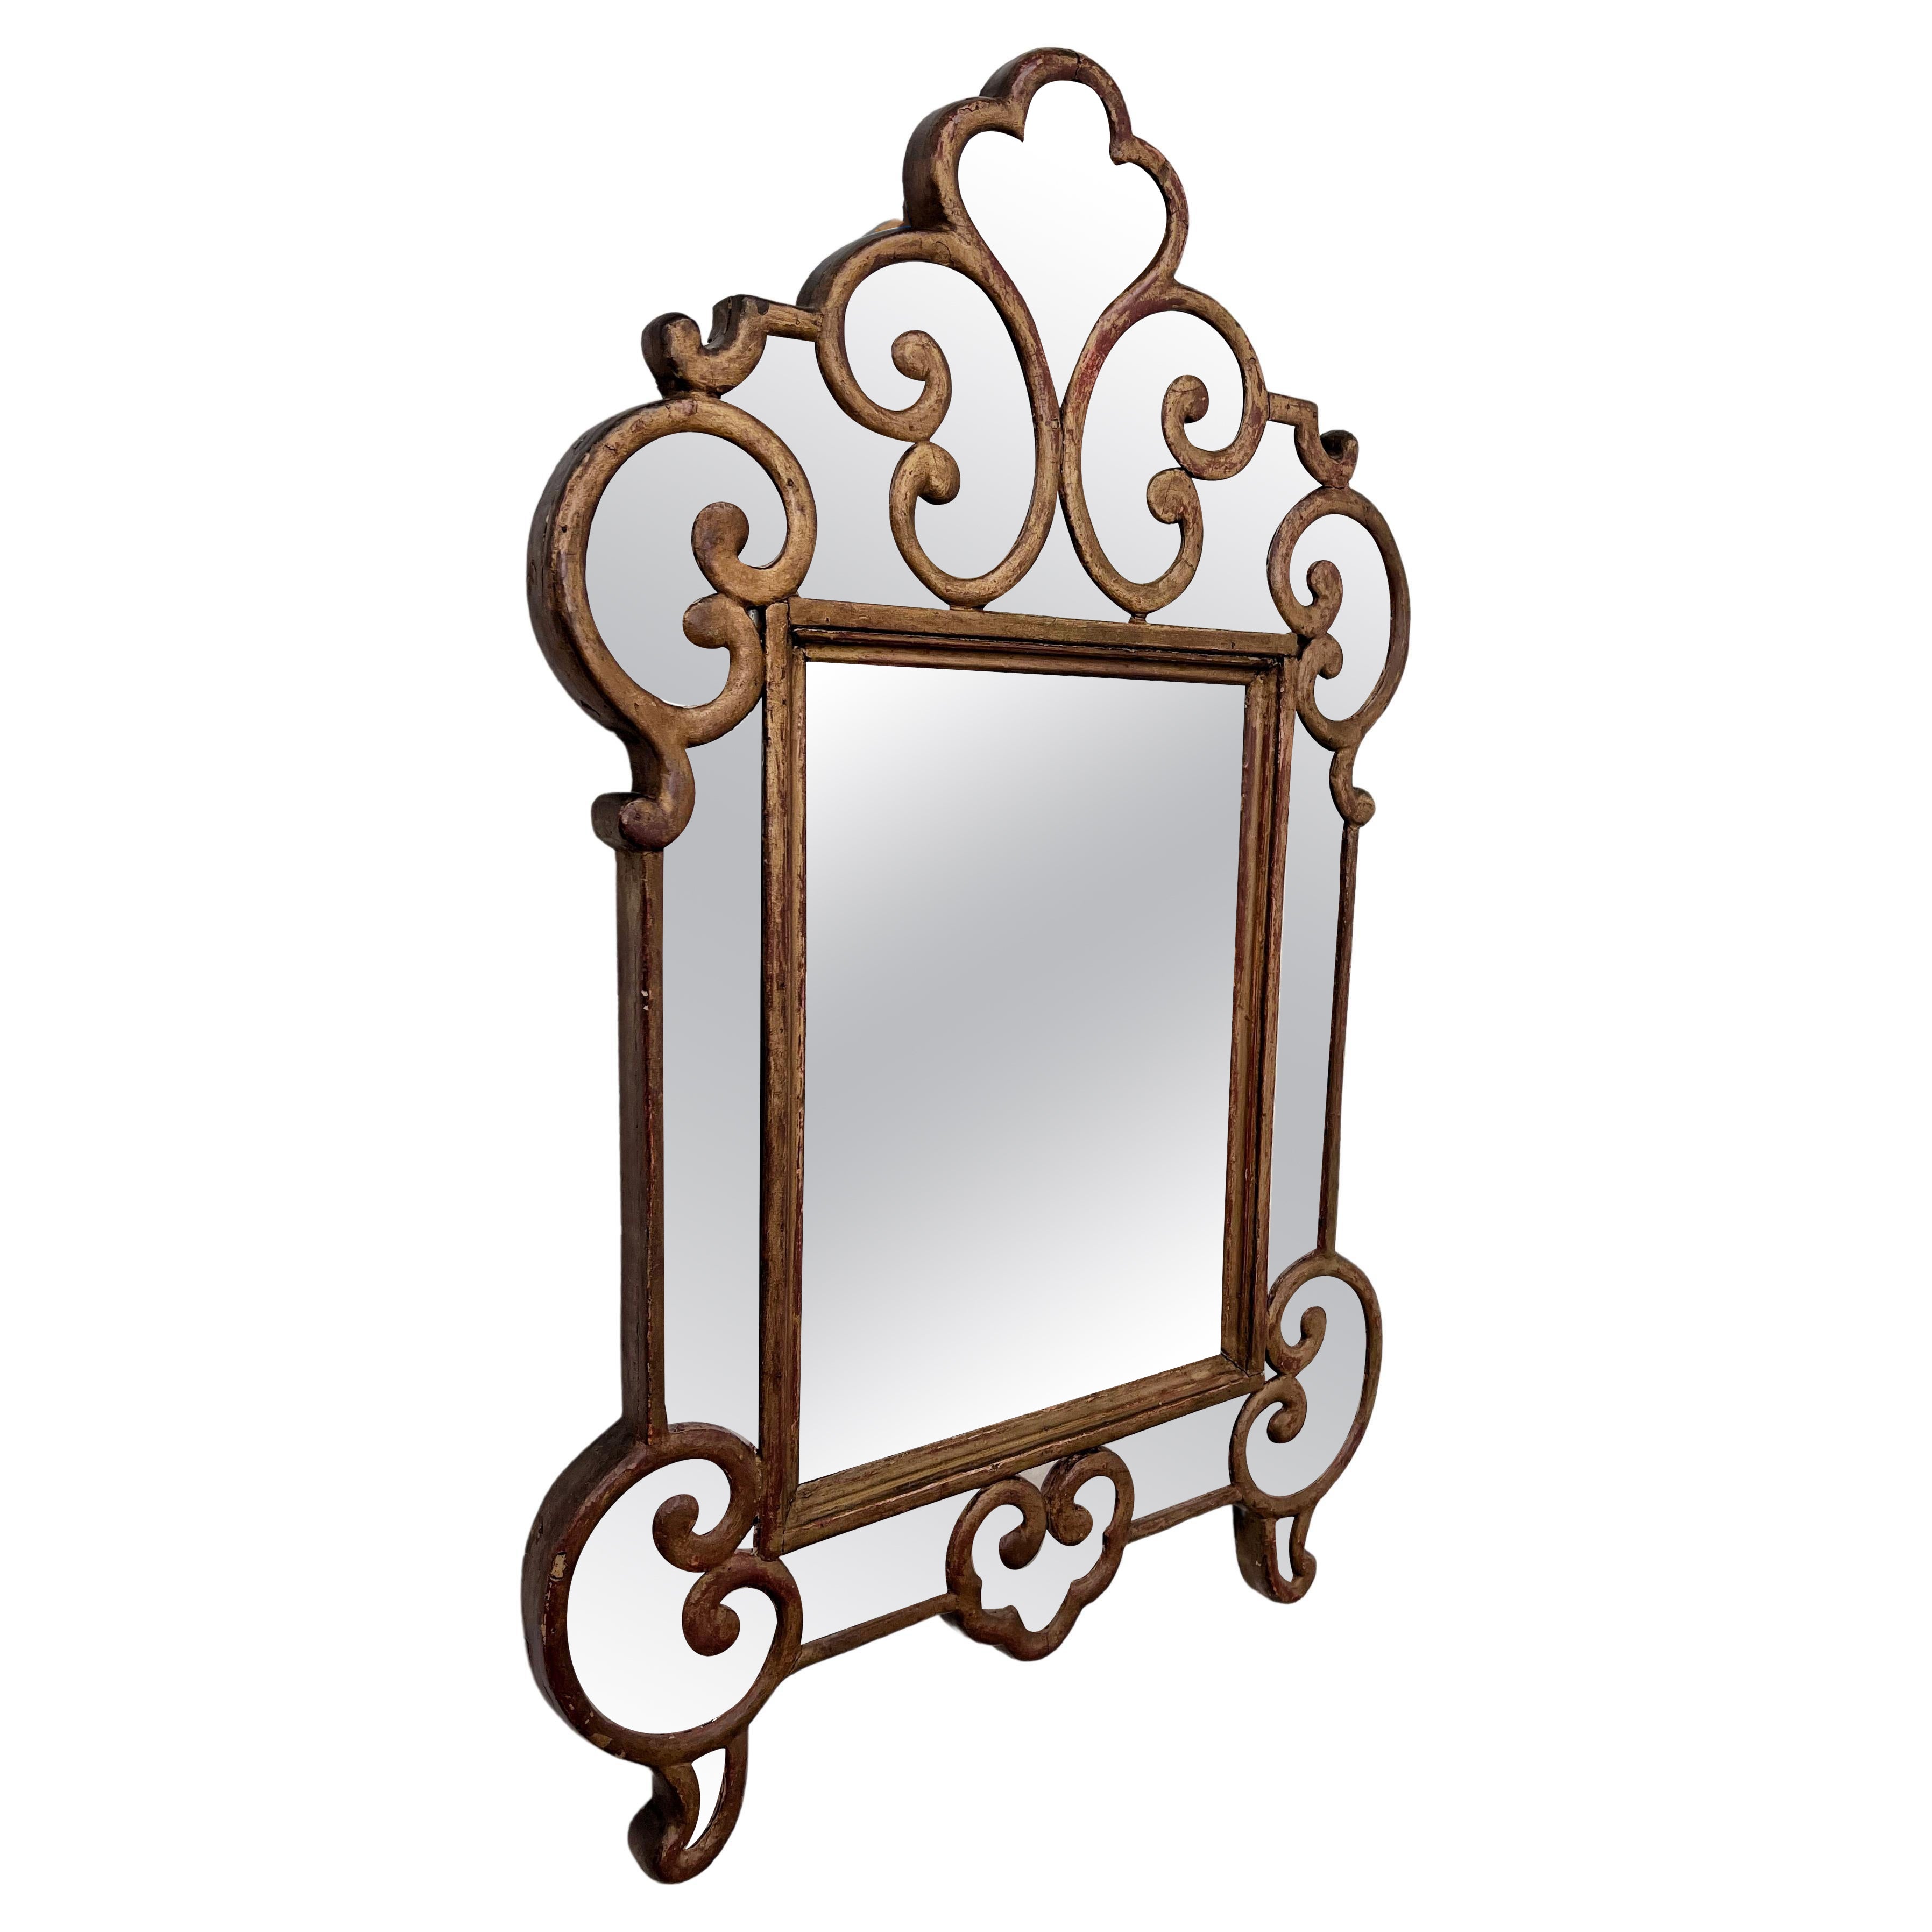 19th century French giltwood mirror by Charles Landre  For Sale